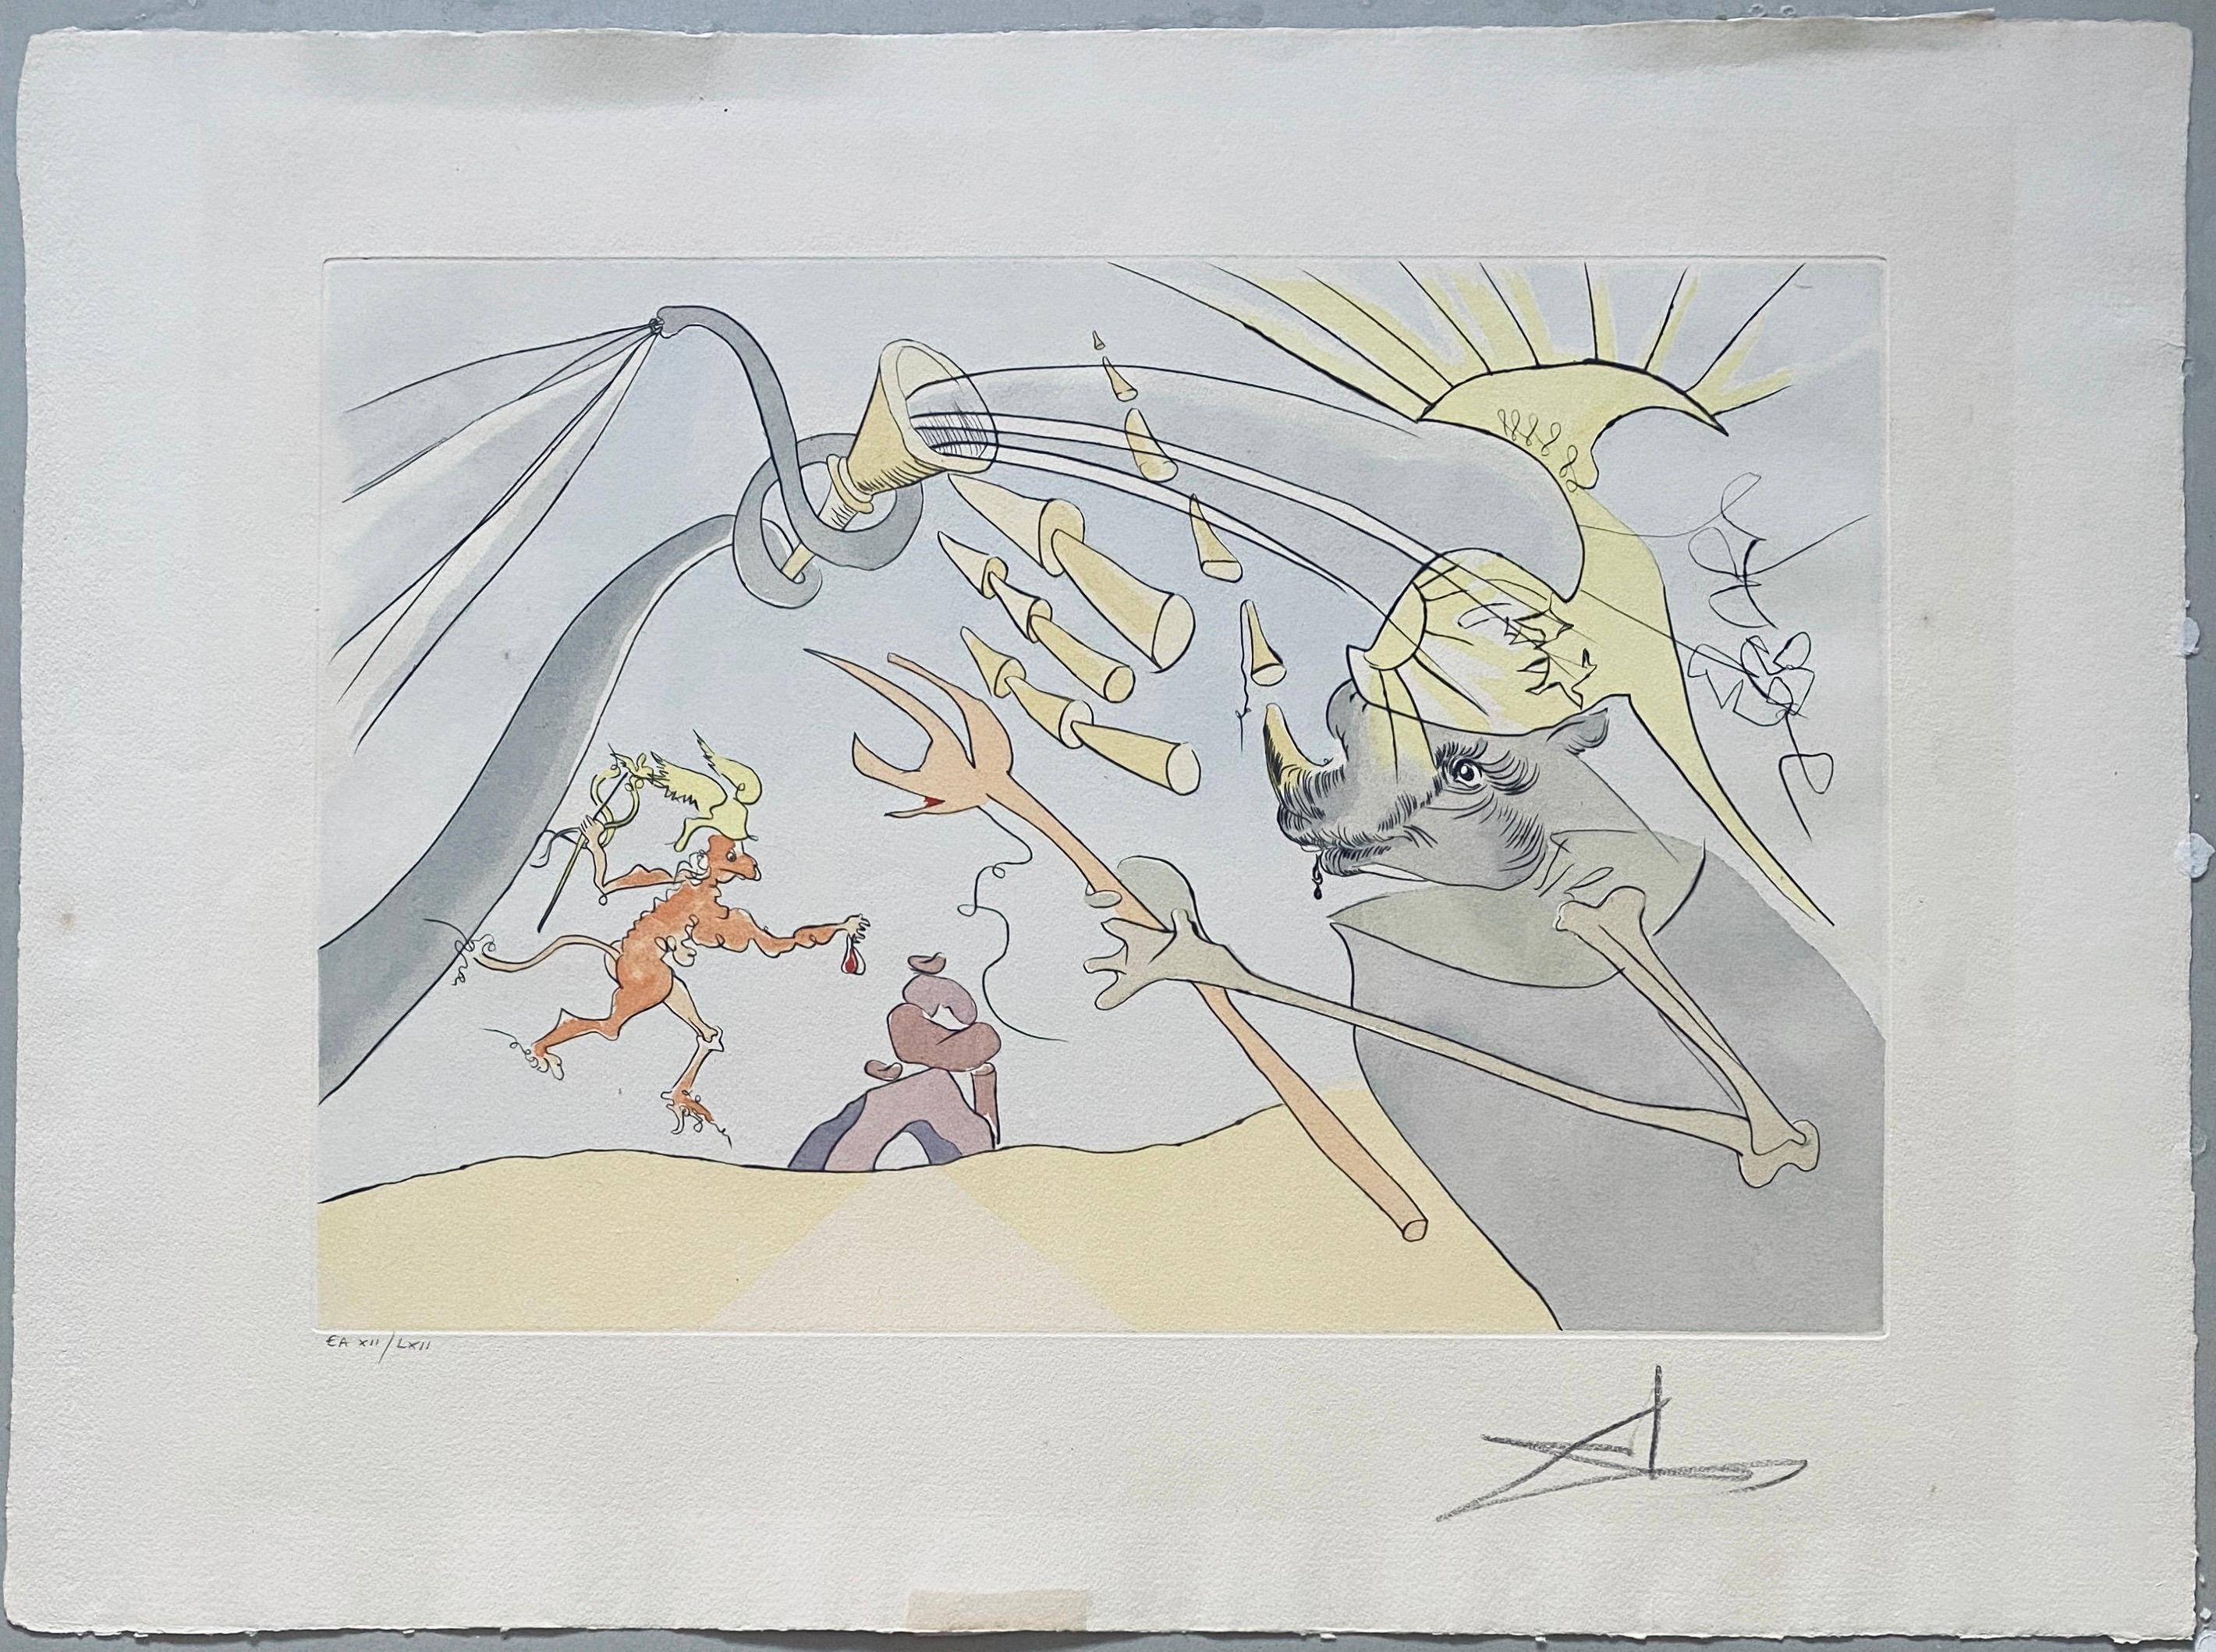 An original signed drypoint etching with color pochoir by Spanish artist Salvador Dali titled 